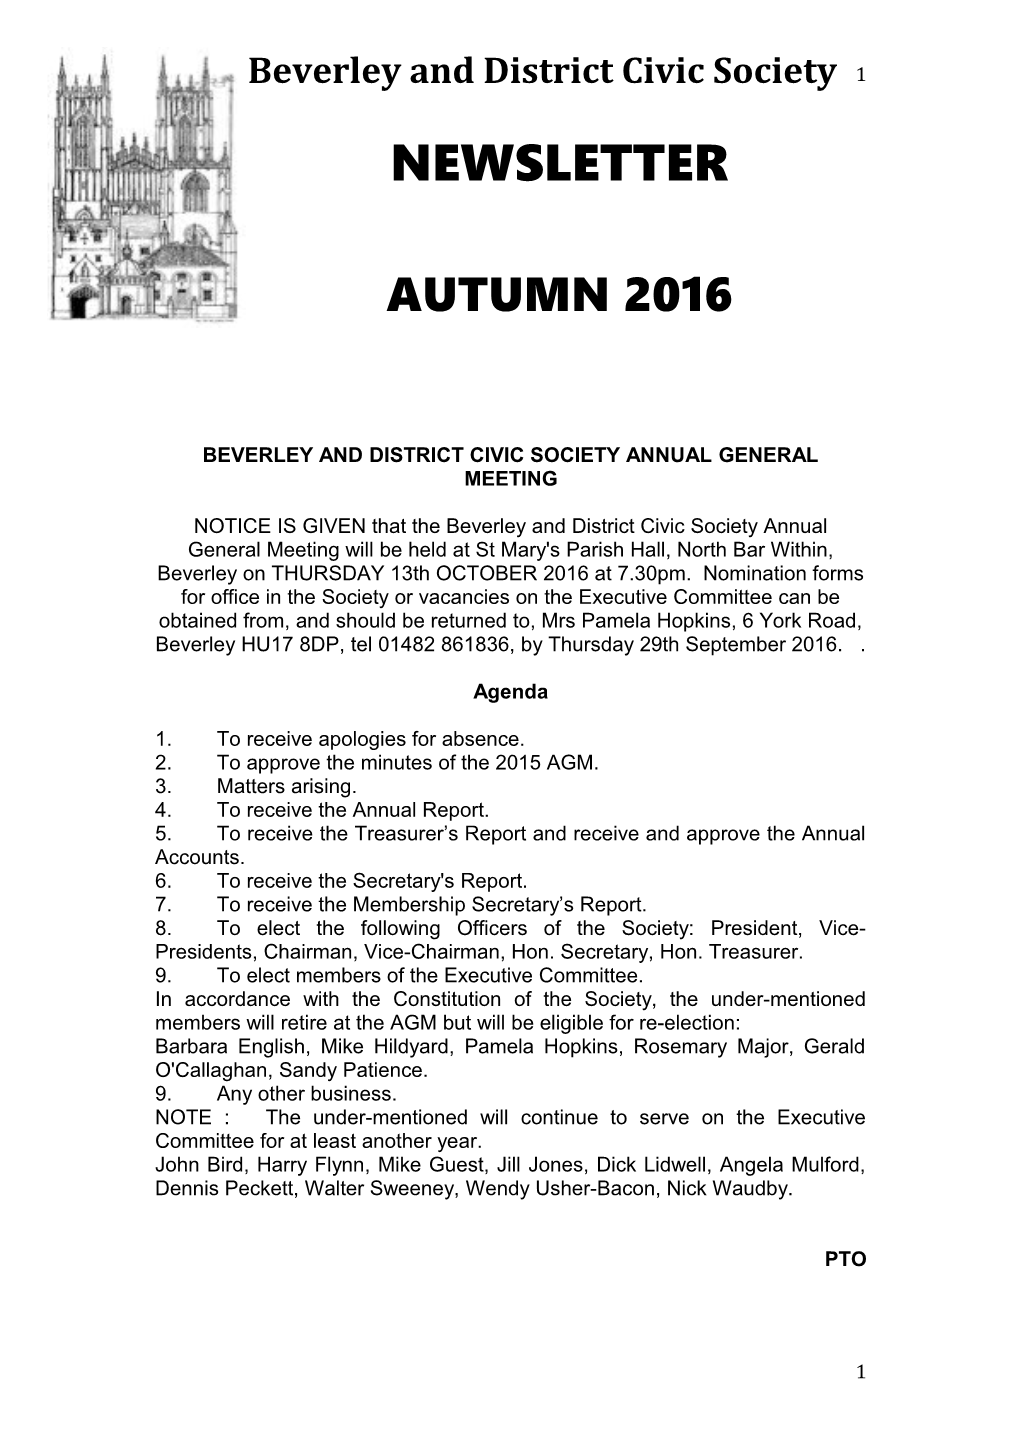 Beverley and District Civic Society Annual General Meeting